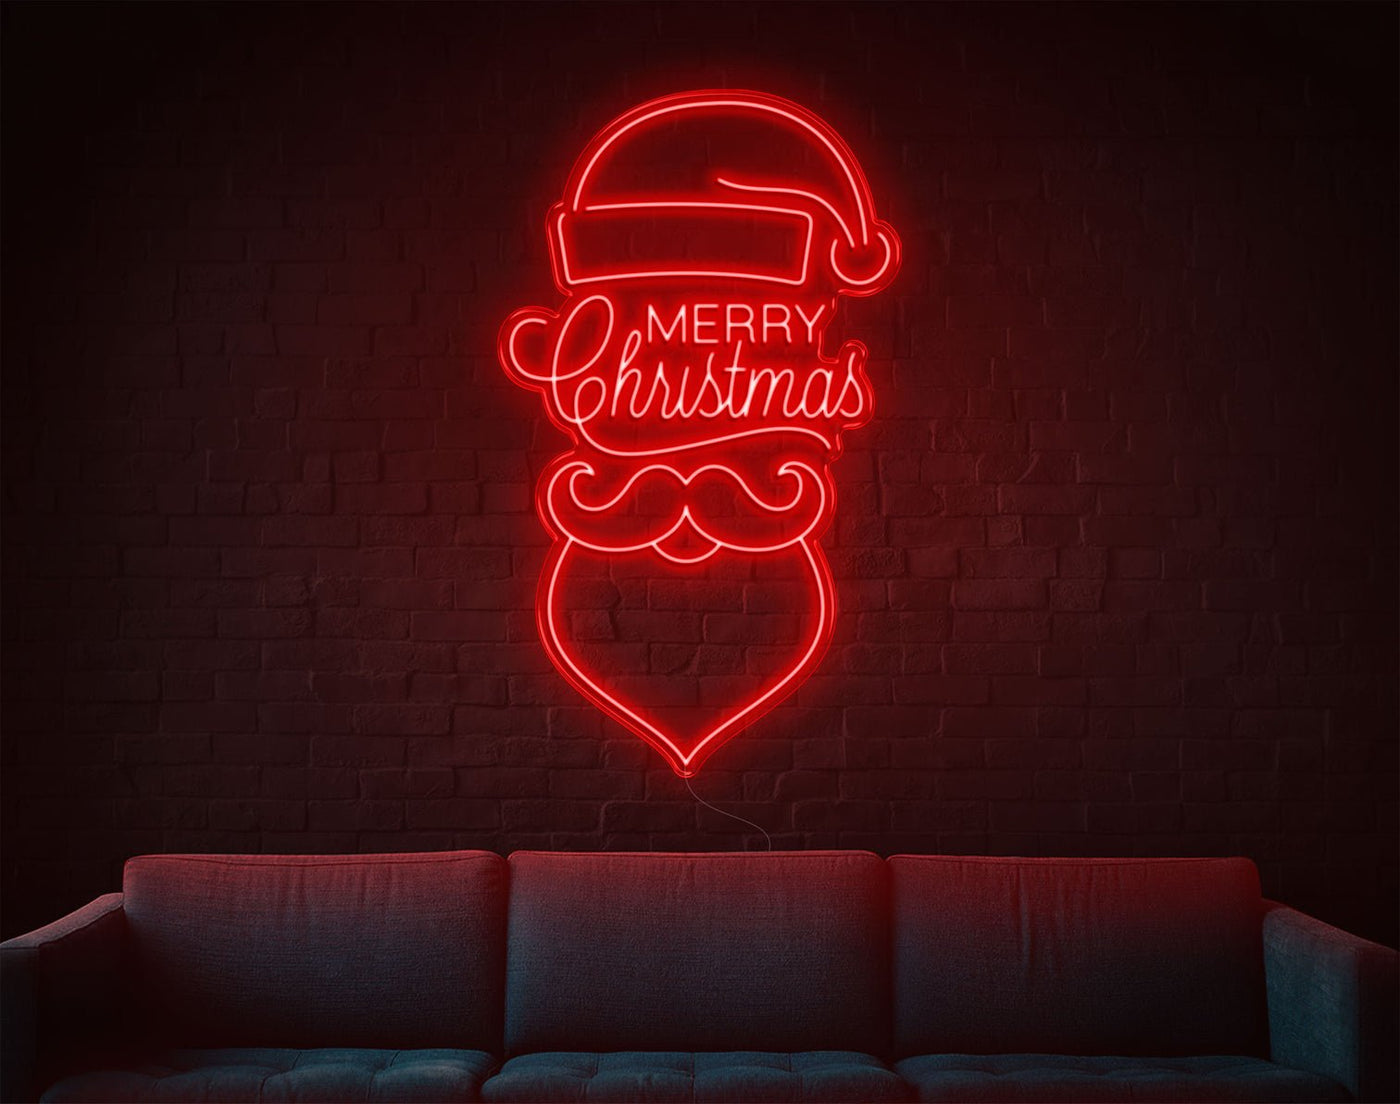 Merry Christmas V3 LED Neon Sign - 50inch x 30inchRed